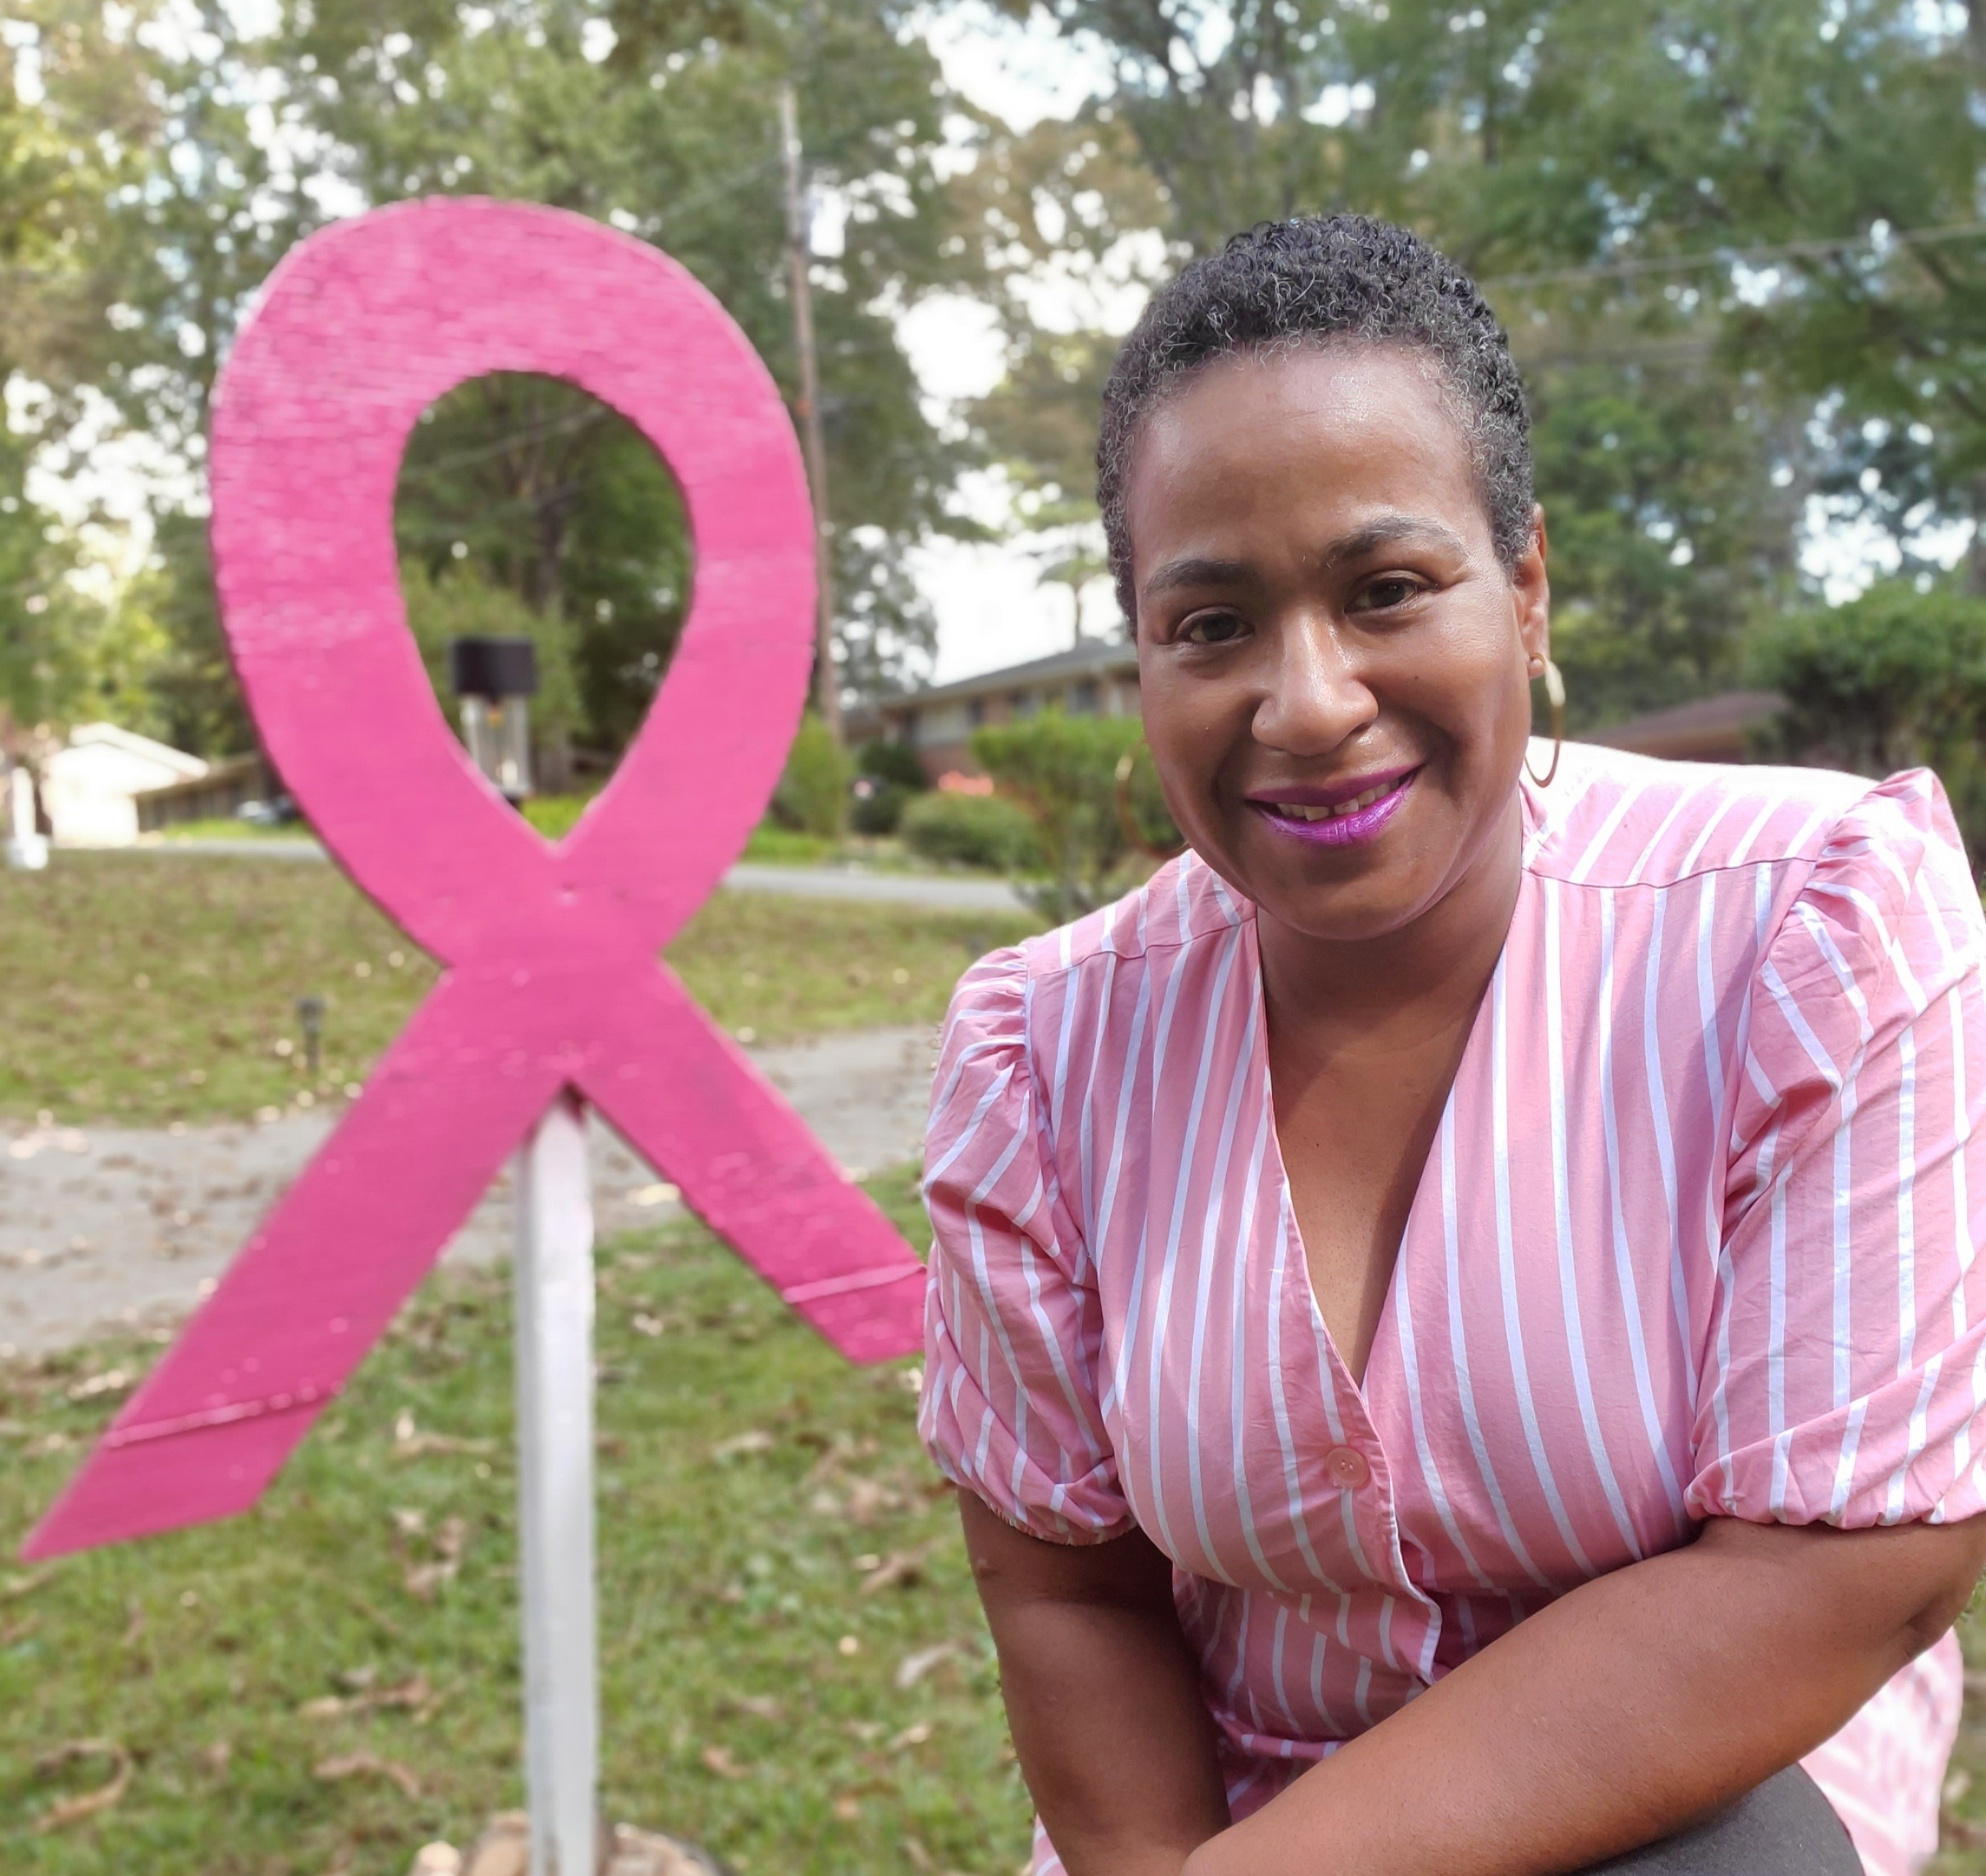 "My family has a strong history of breast cancer. Awareness is extremely important. Every woman should know how her breasts feel so that she can recognize any changes. Do the yearly mammograms, do the breast self check. Early detection can be the key to a better outcome."- Deborah Rice, Staff Accounting Assistant Corporate Tax Accounting 